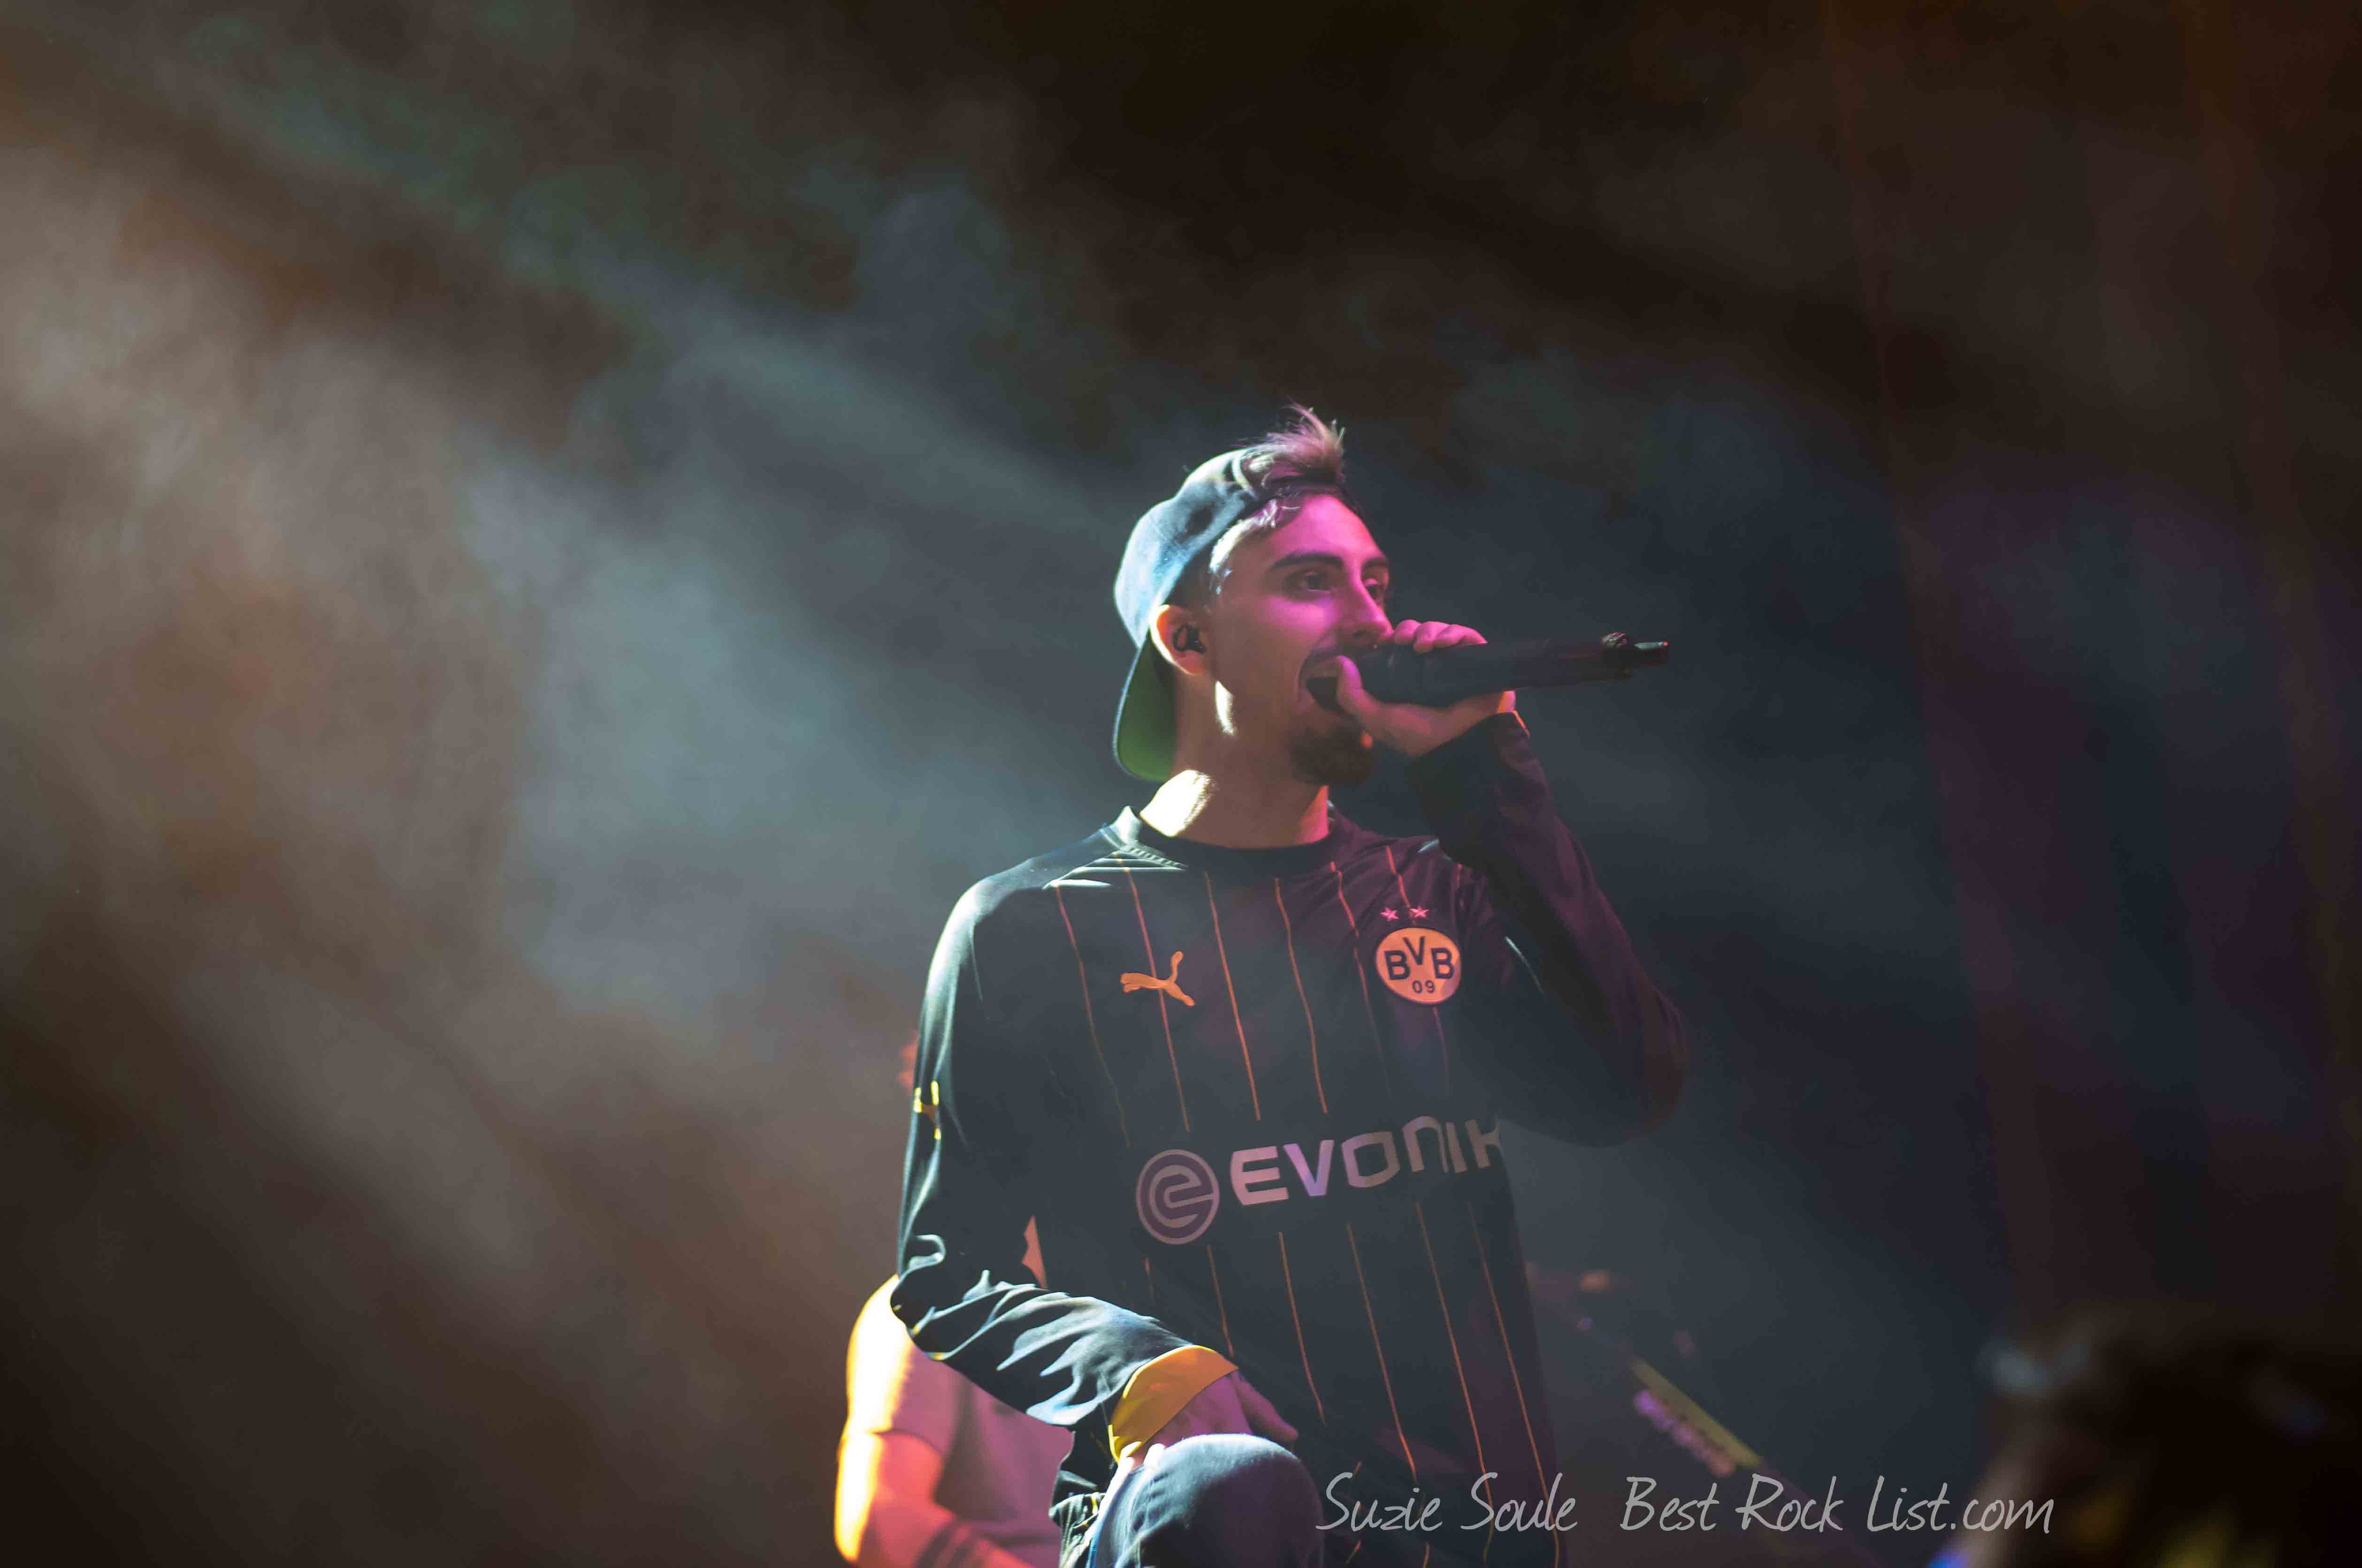 Kyle Pavone of We Came As Romans